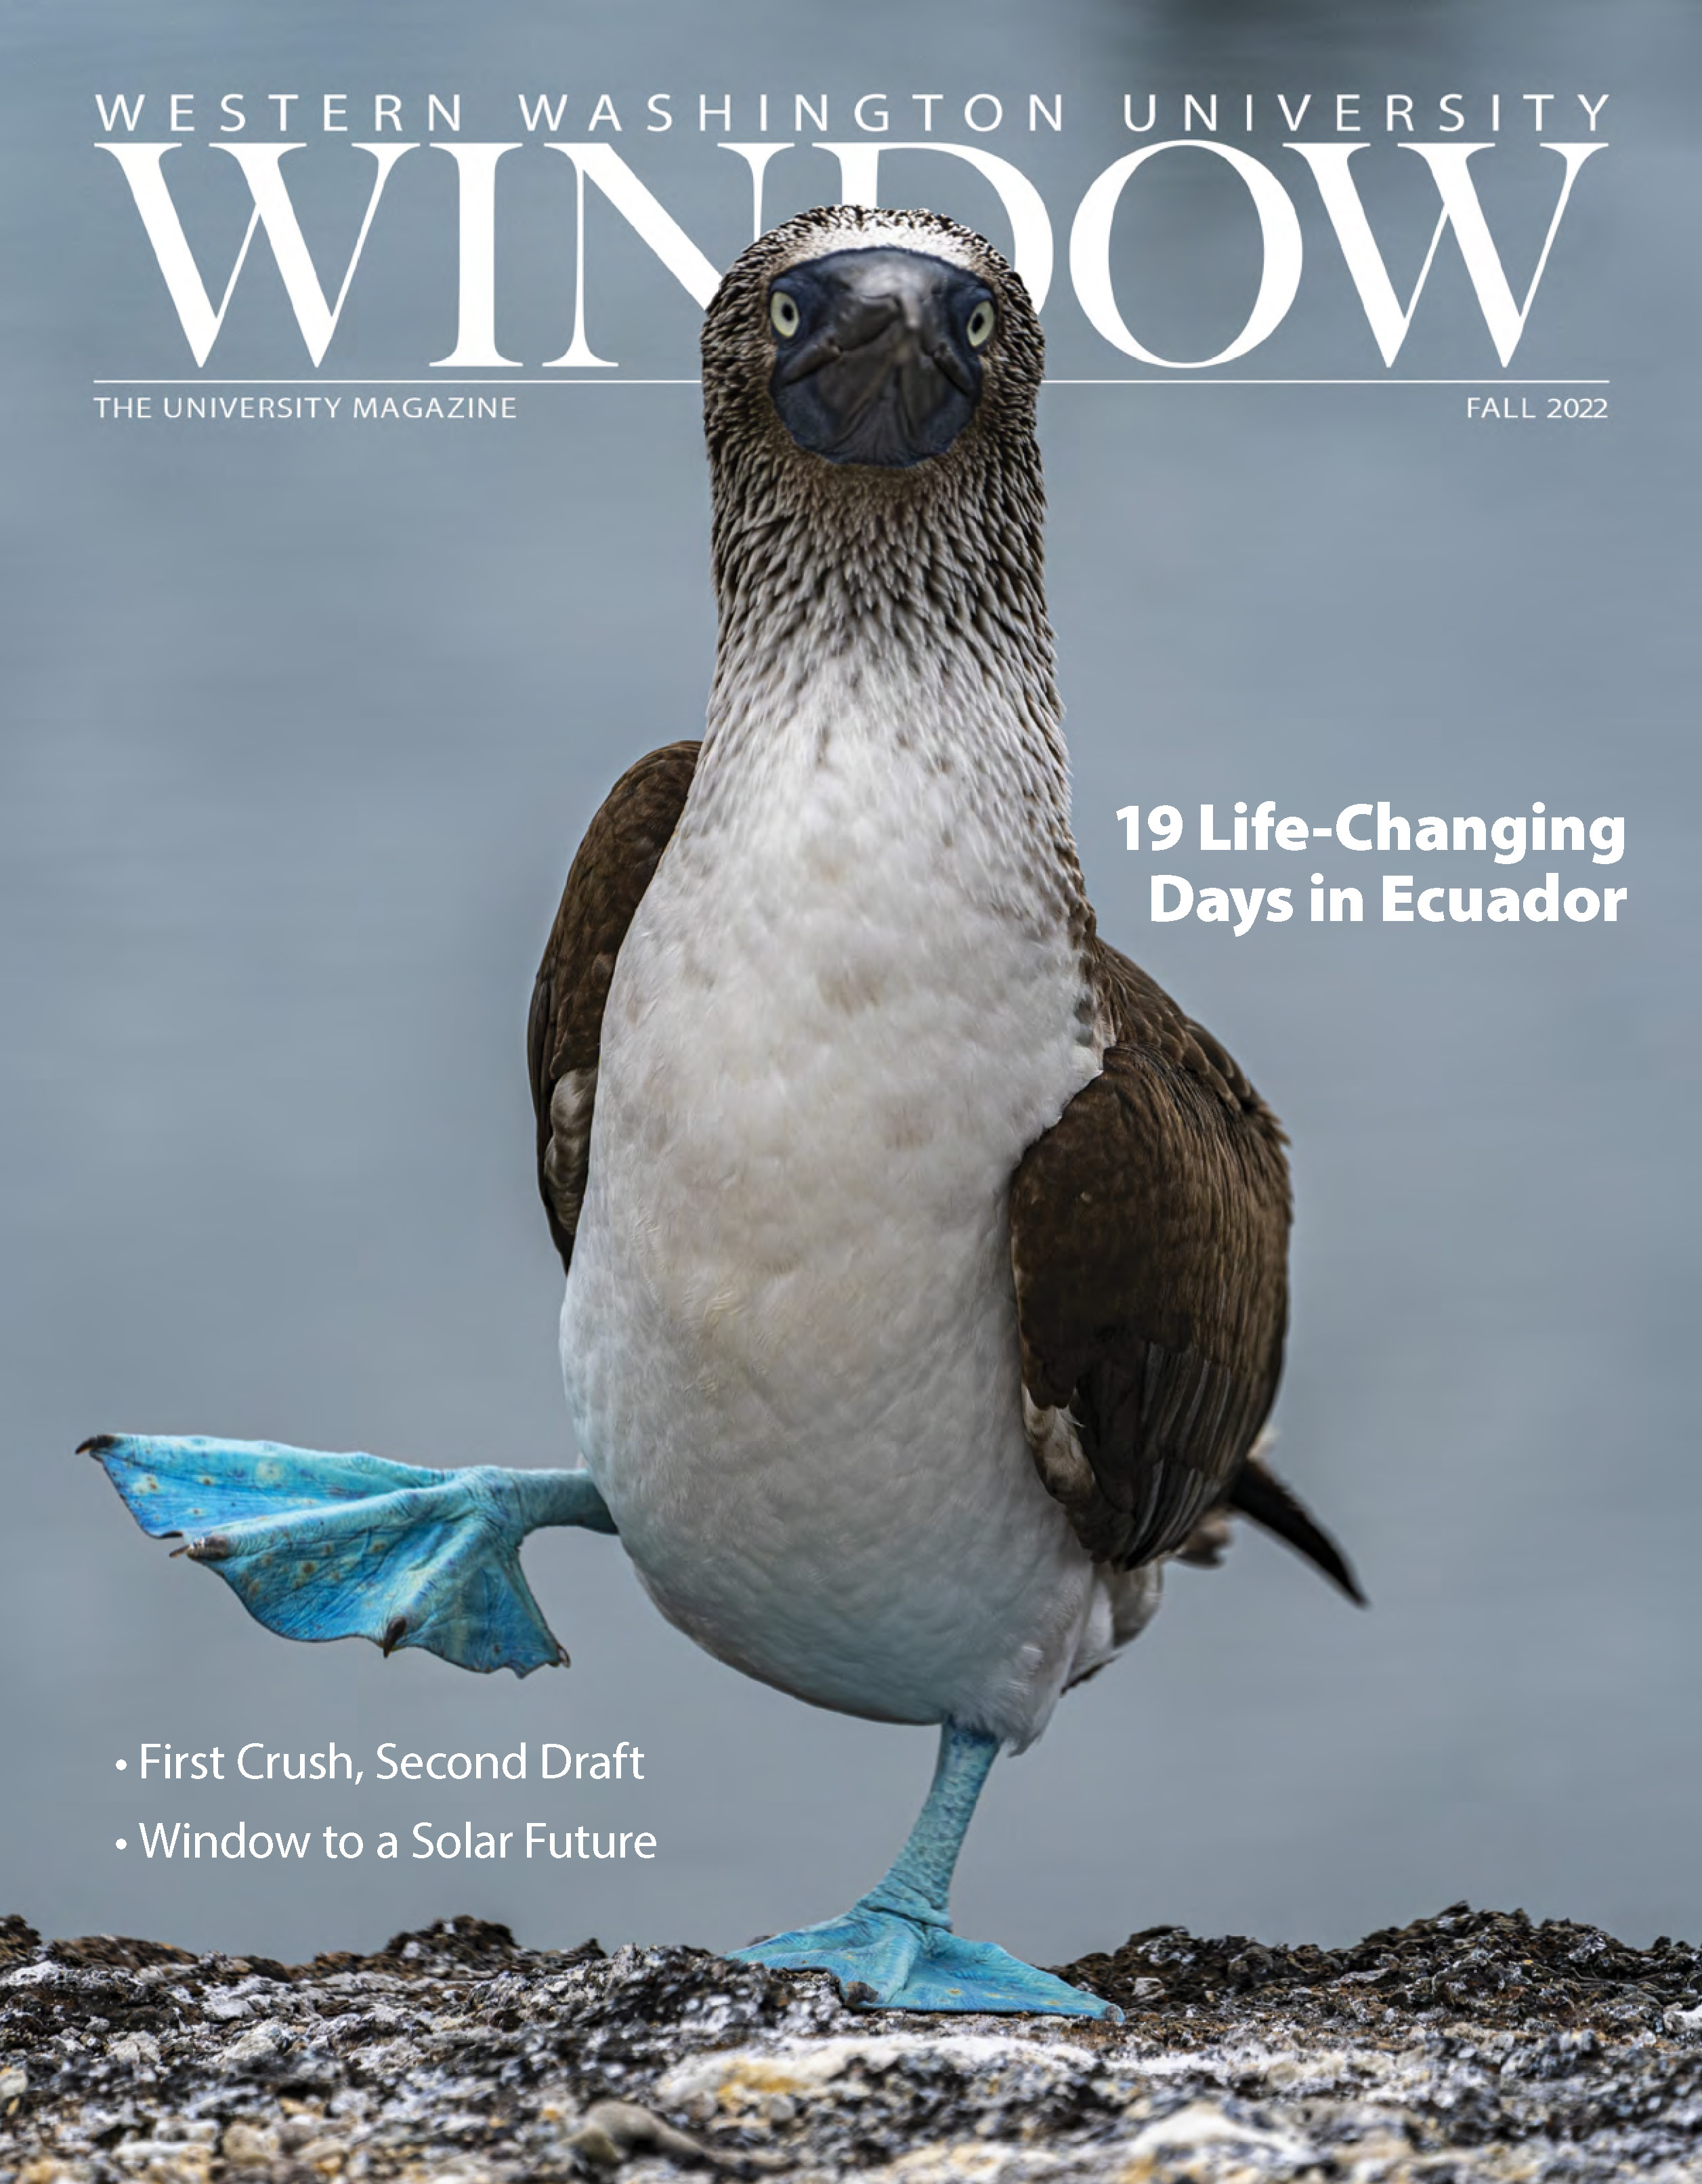 cover photo of a blue-footed booby